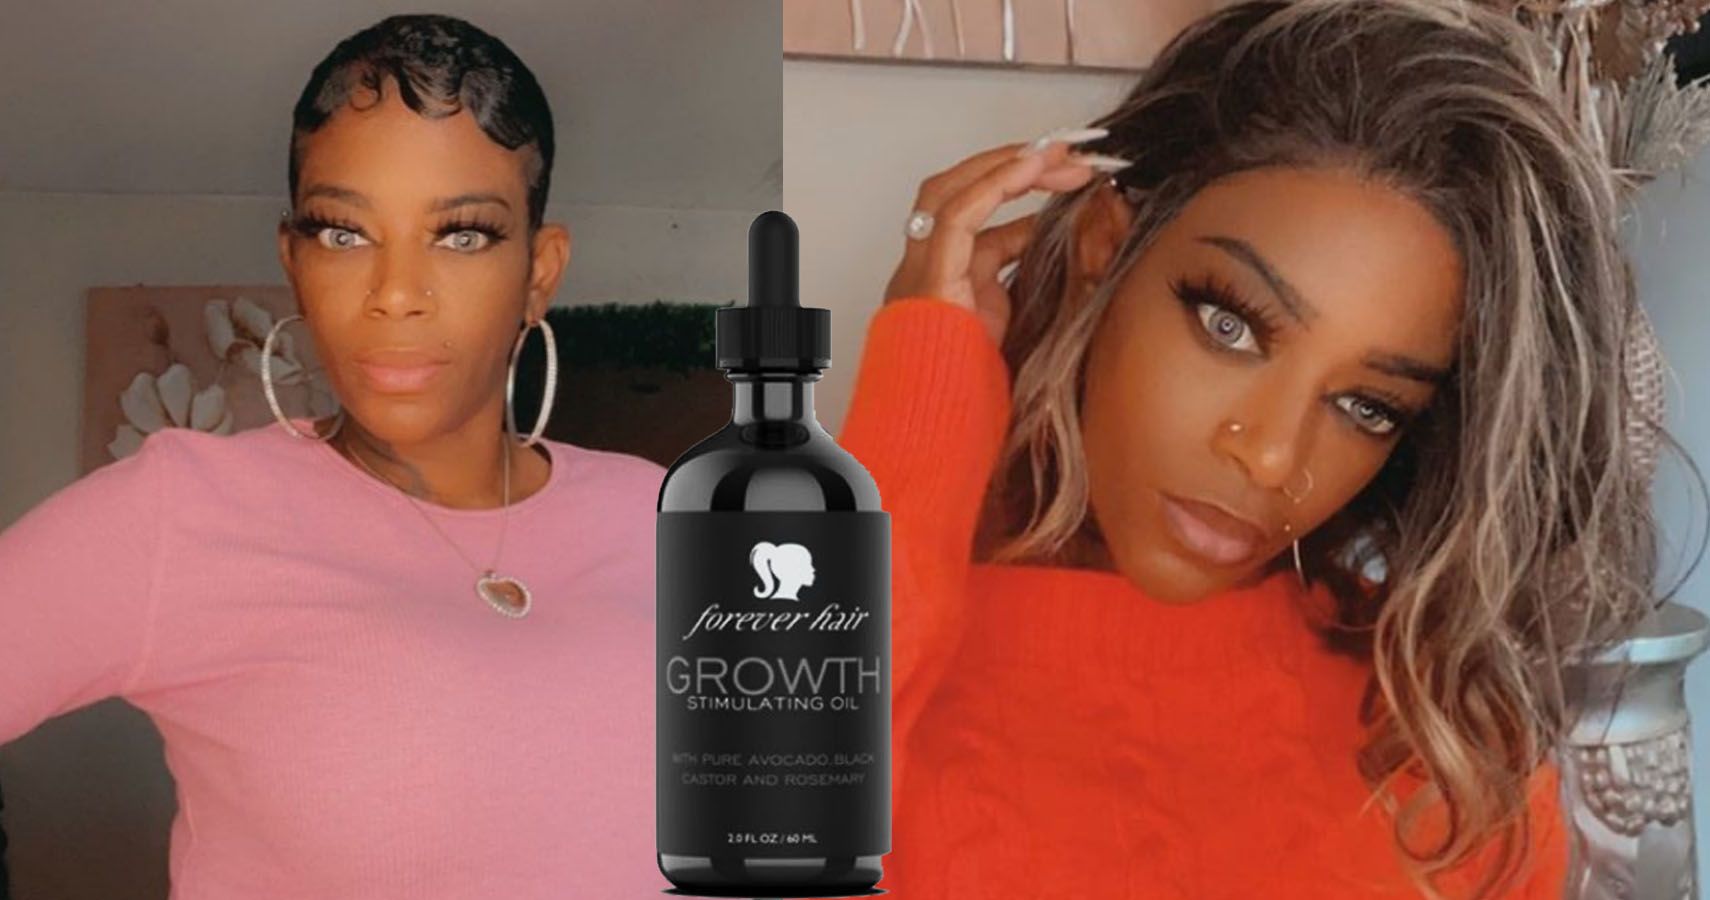 Woman Who Used Gorilla Glue in Hair Launches Her Own Haircare Line